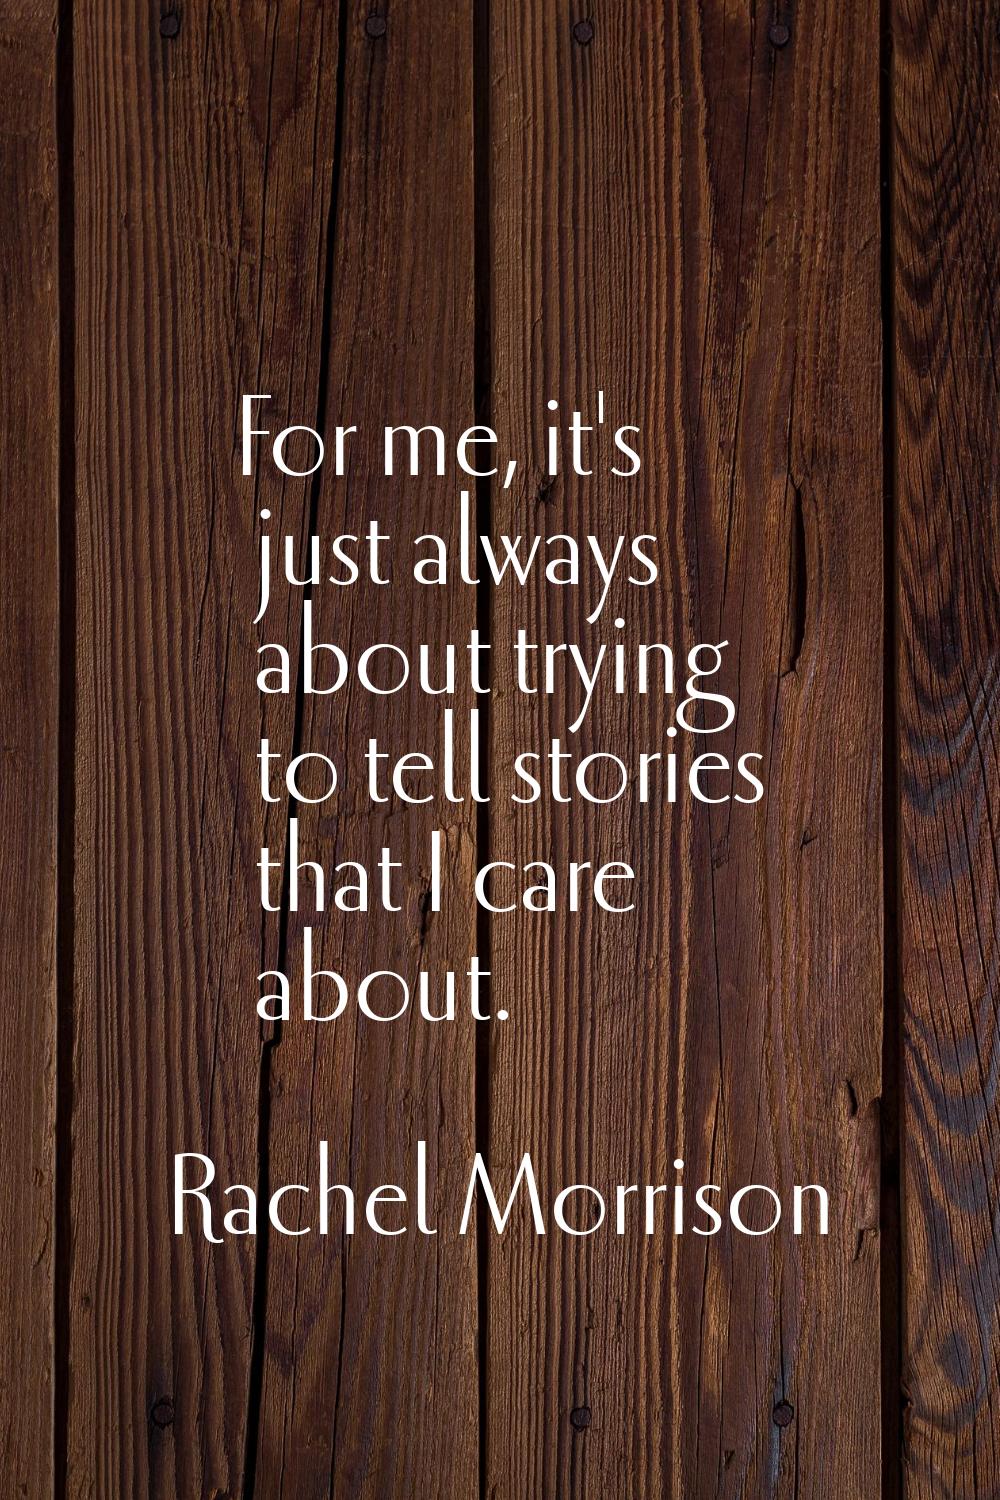 For me, it's just always about trying to tell stories that I care about.